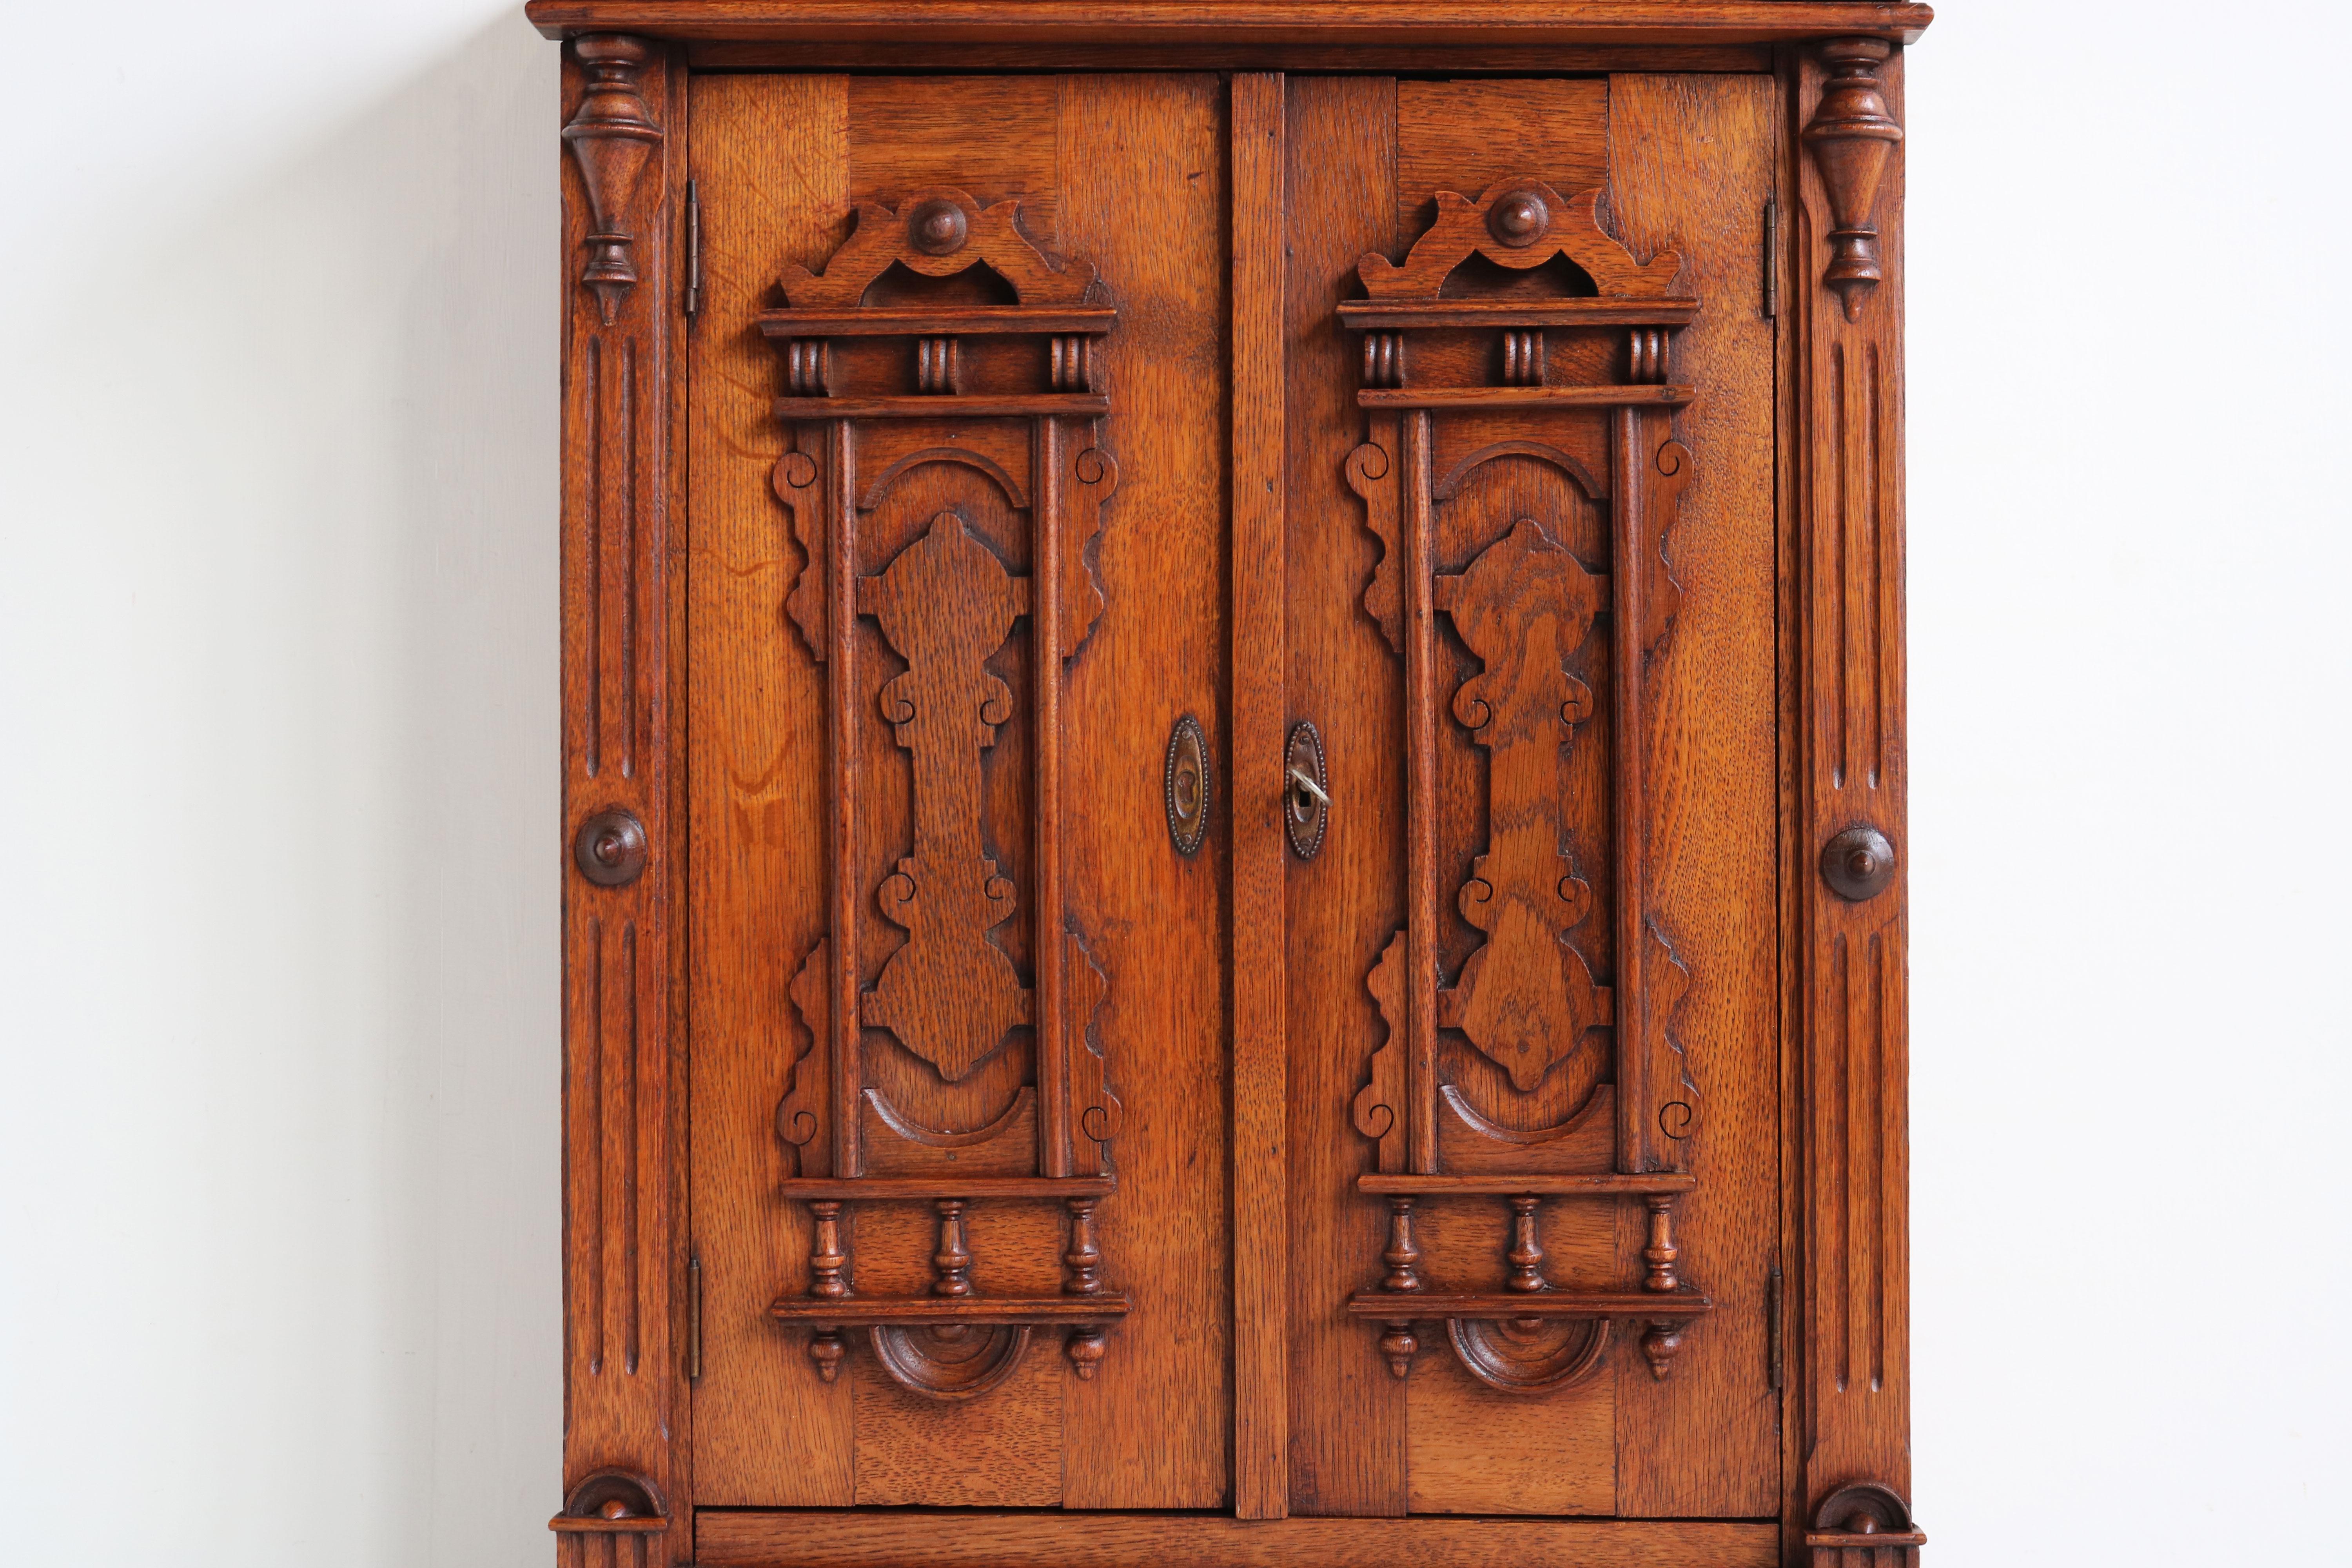 Neoclassical Revival Antique German 19th Century Gründerzeit Wall Cabinet Neo Classical Oak Drawer For Sale